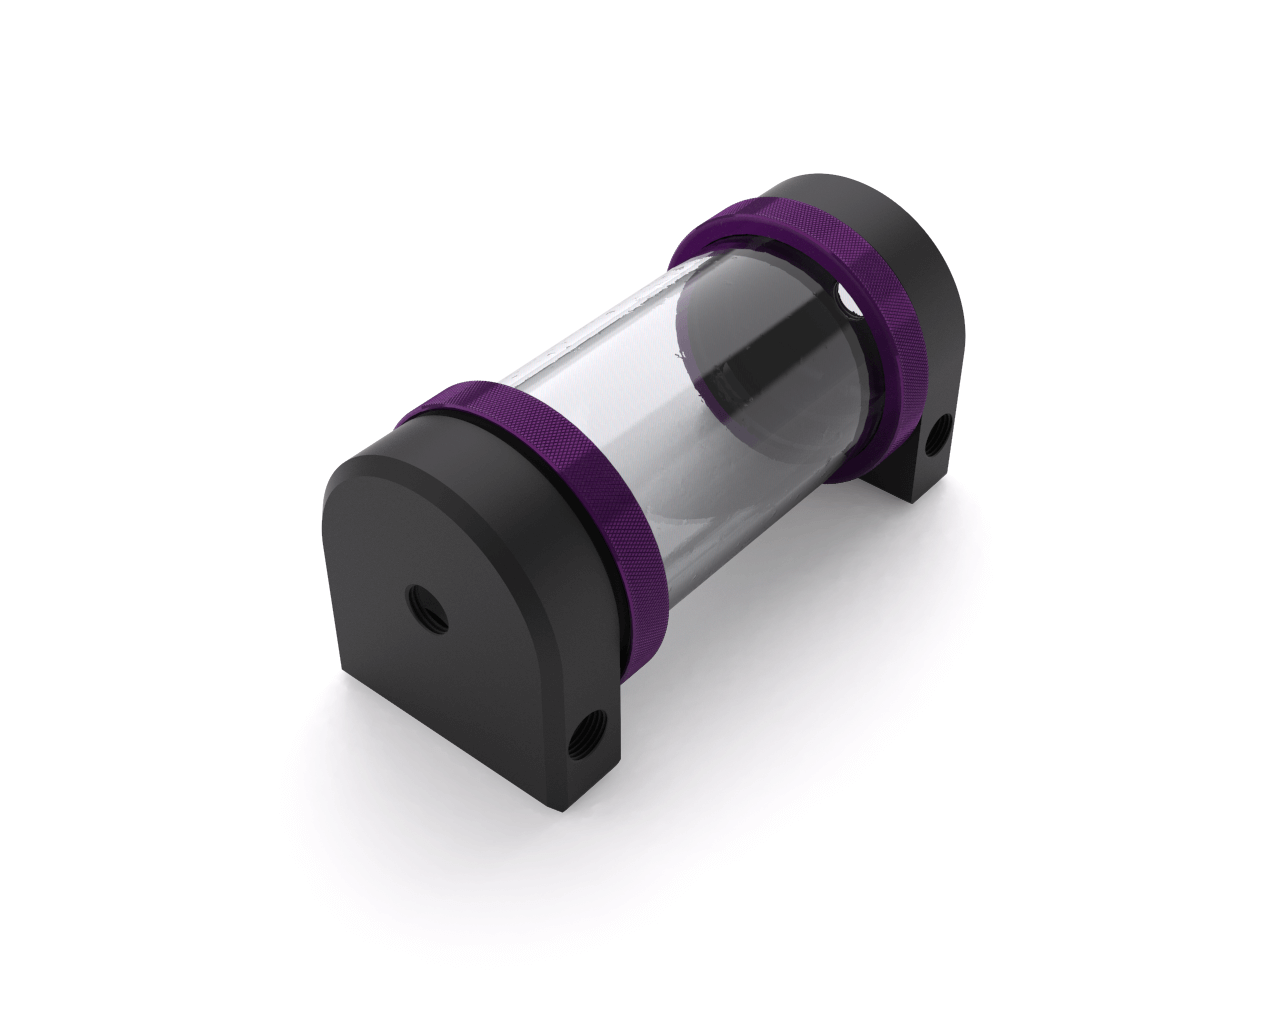 PrimoChill CTR Hard Mount Phase II Reservoir - Black POM - 120mm - PrimoChill - KEEPING IT COOL Candy Purple